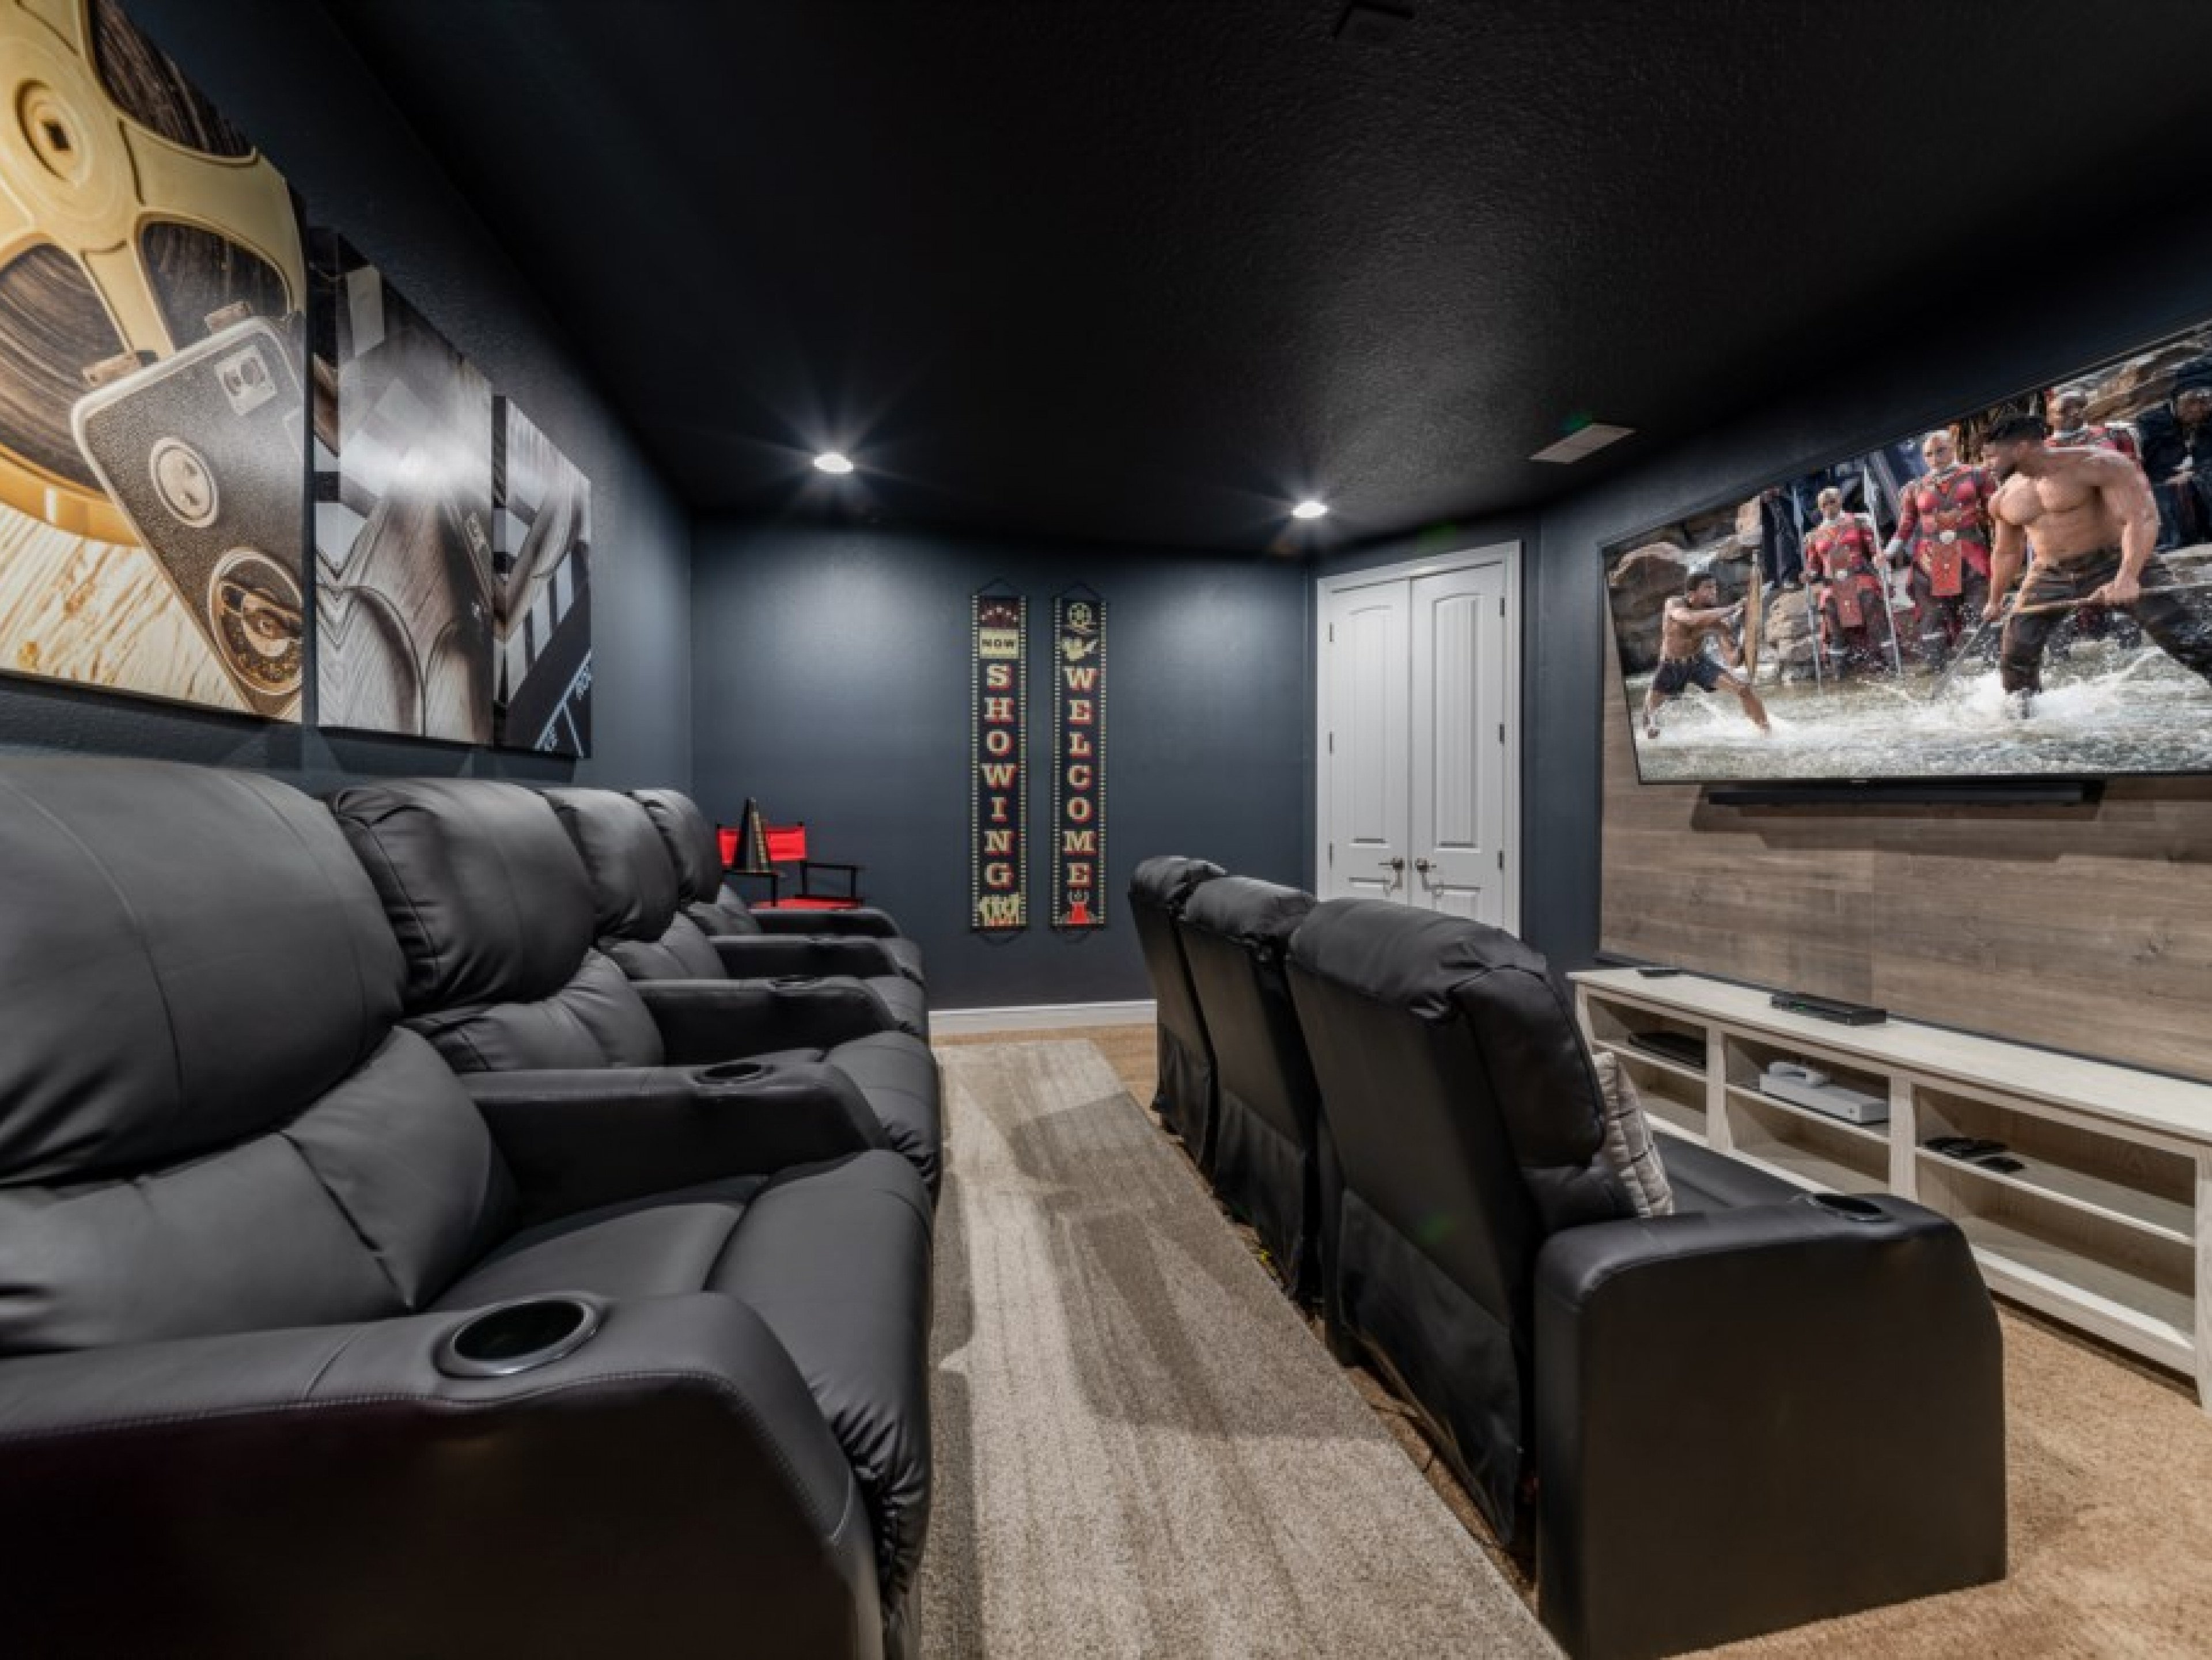 Encore Resort 934  - vacation rentals with home theaters